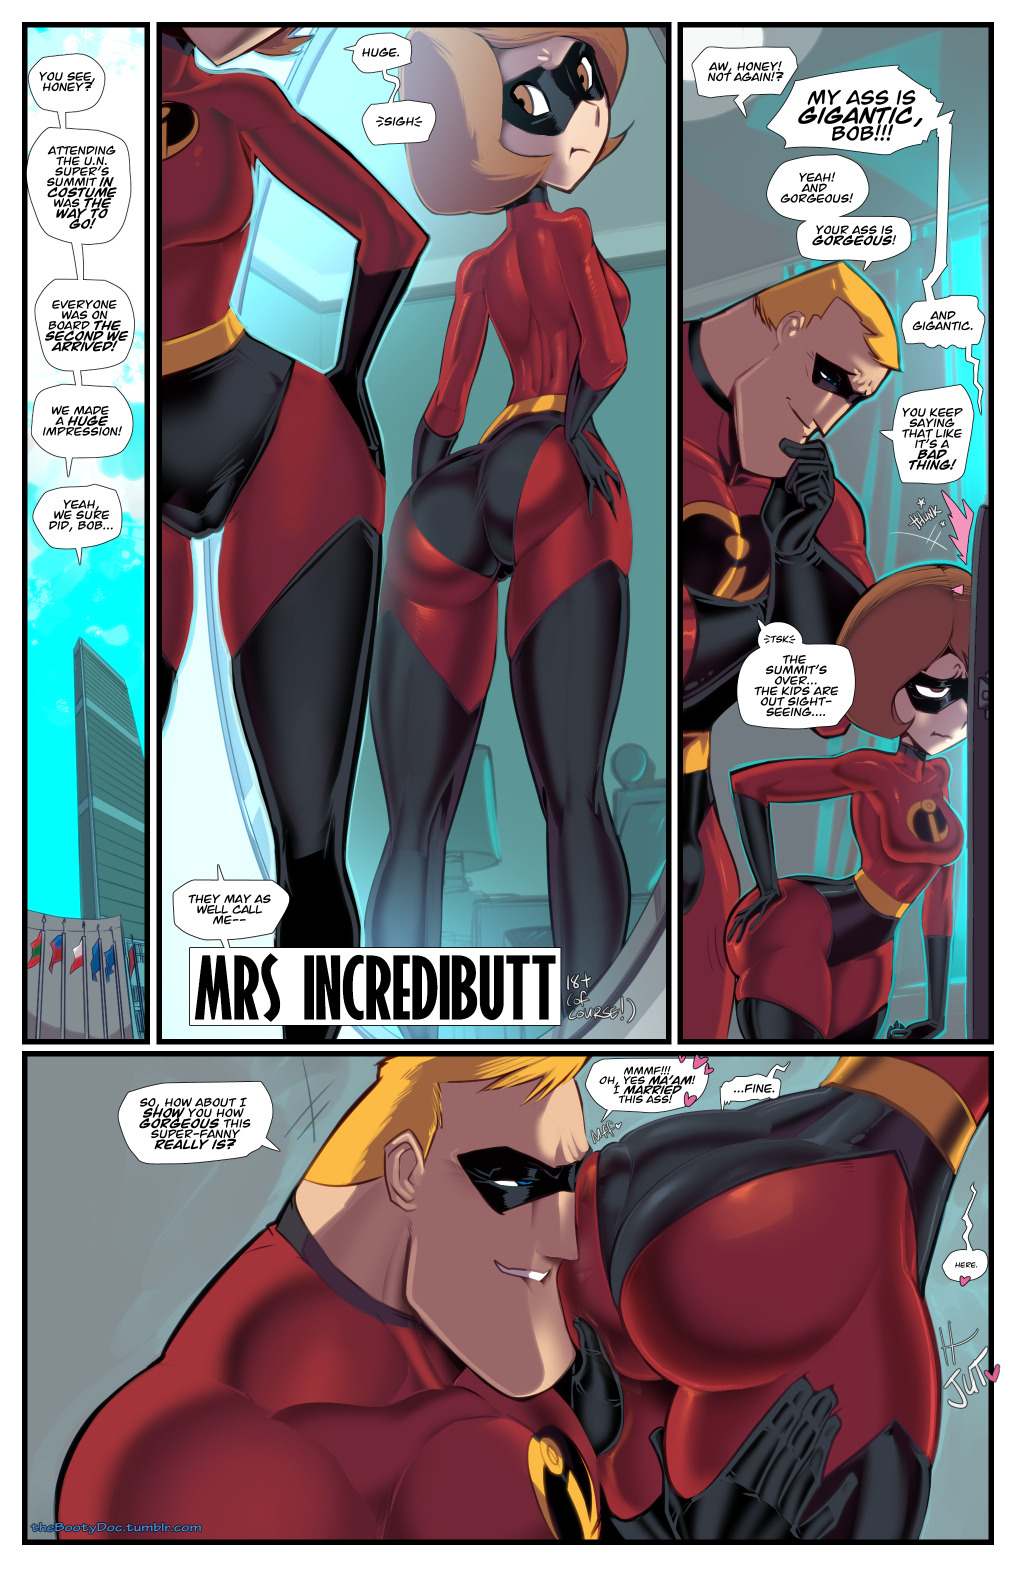 Incredibles stored energy part 2 porn comic